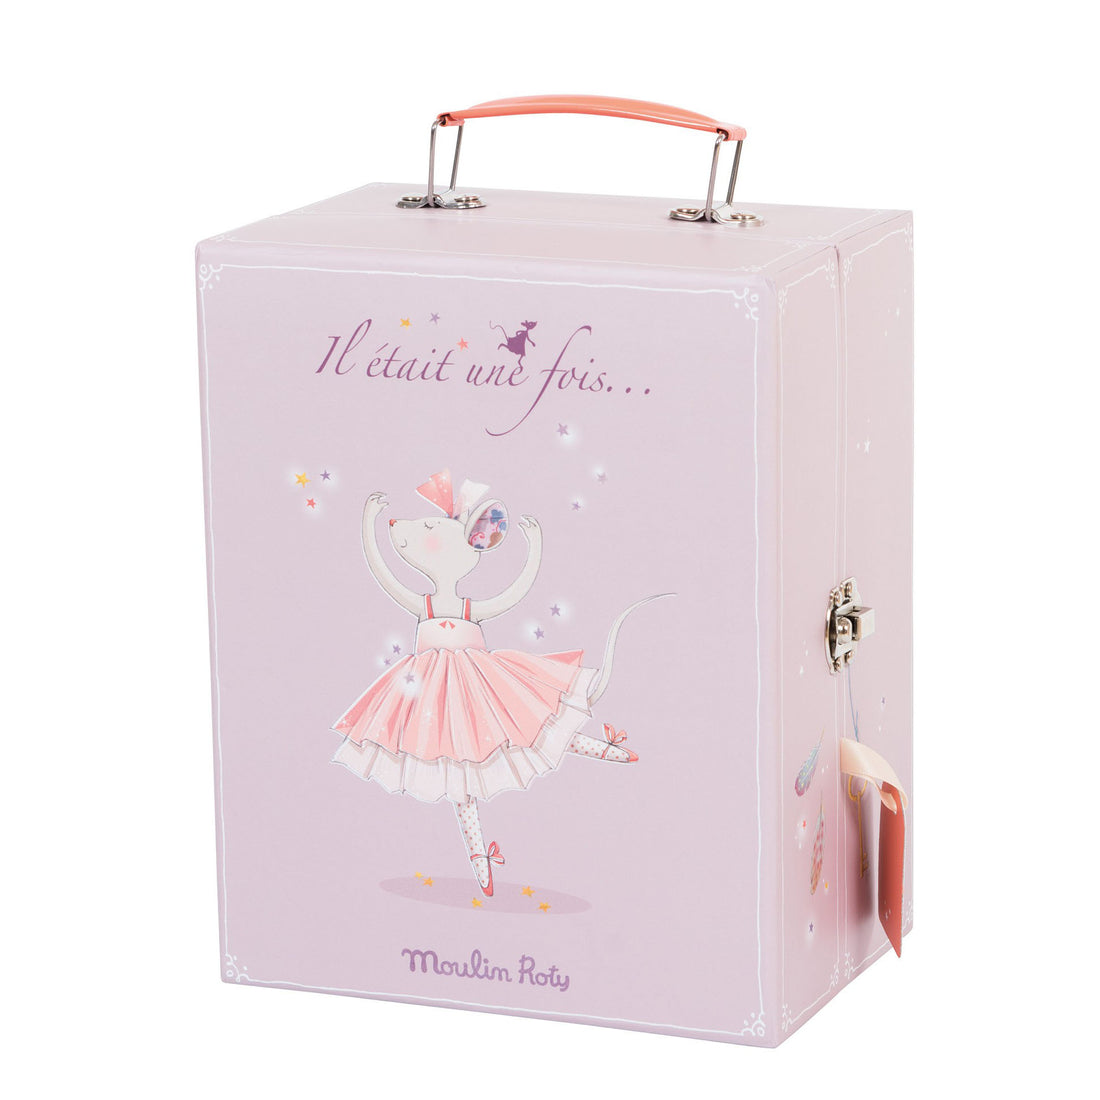 moulin-roty-fairytales-ballerina-suitcase-lilac- (3)